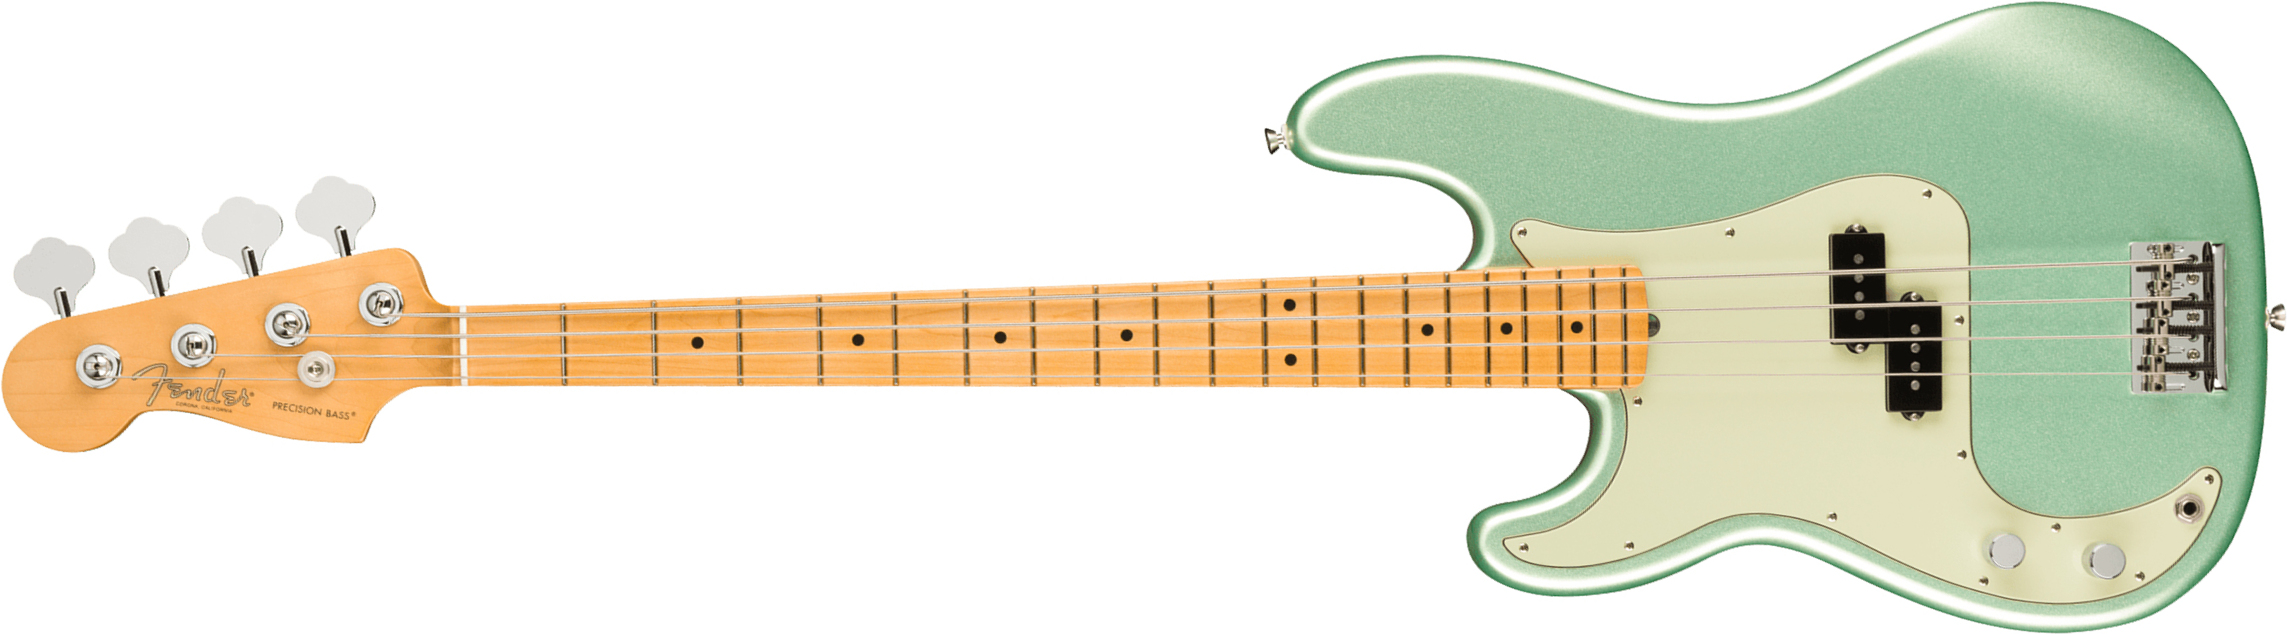 Fender Precision Bass American Professional Ii Lh Gaucher Usa Mn - Mystic Surf Green - Basse Électrique Solid Body - Main picture